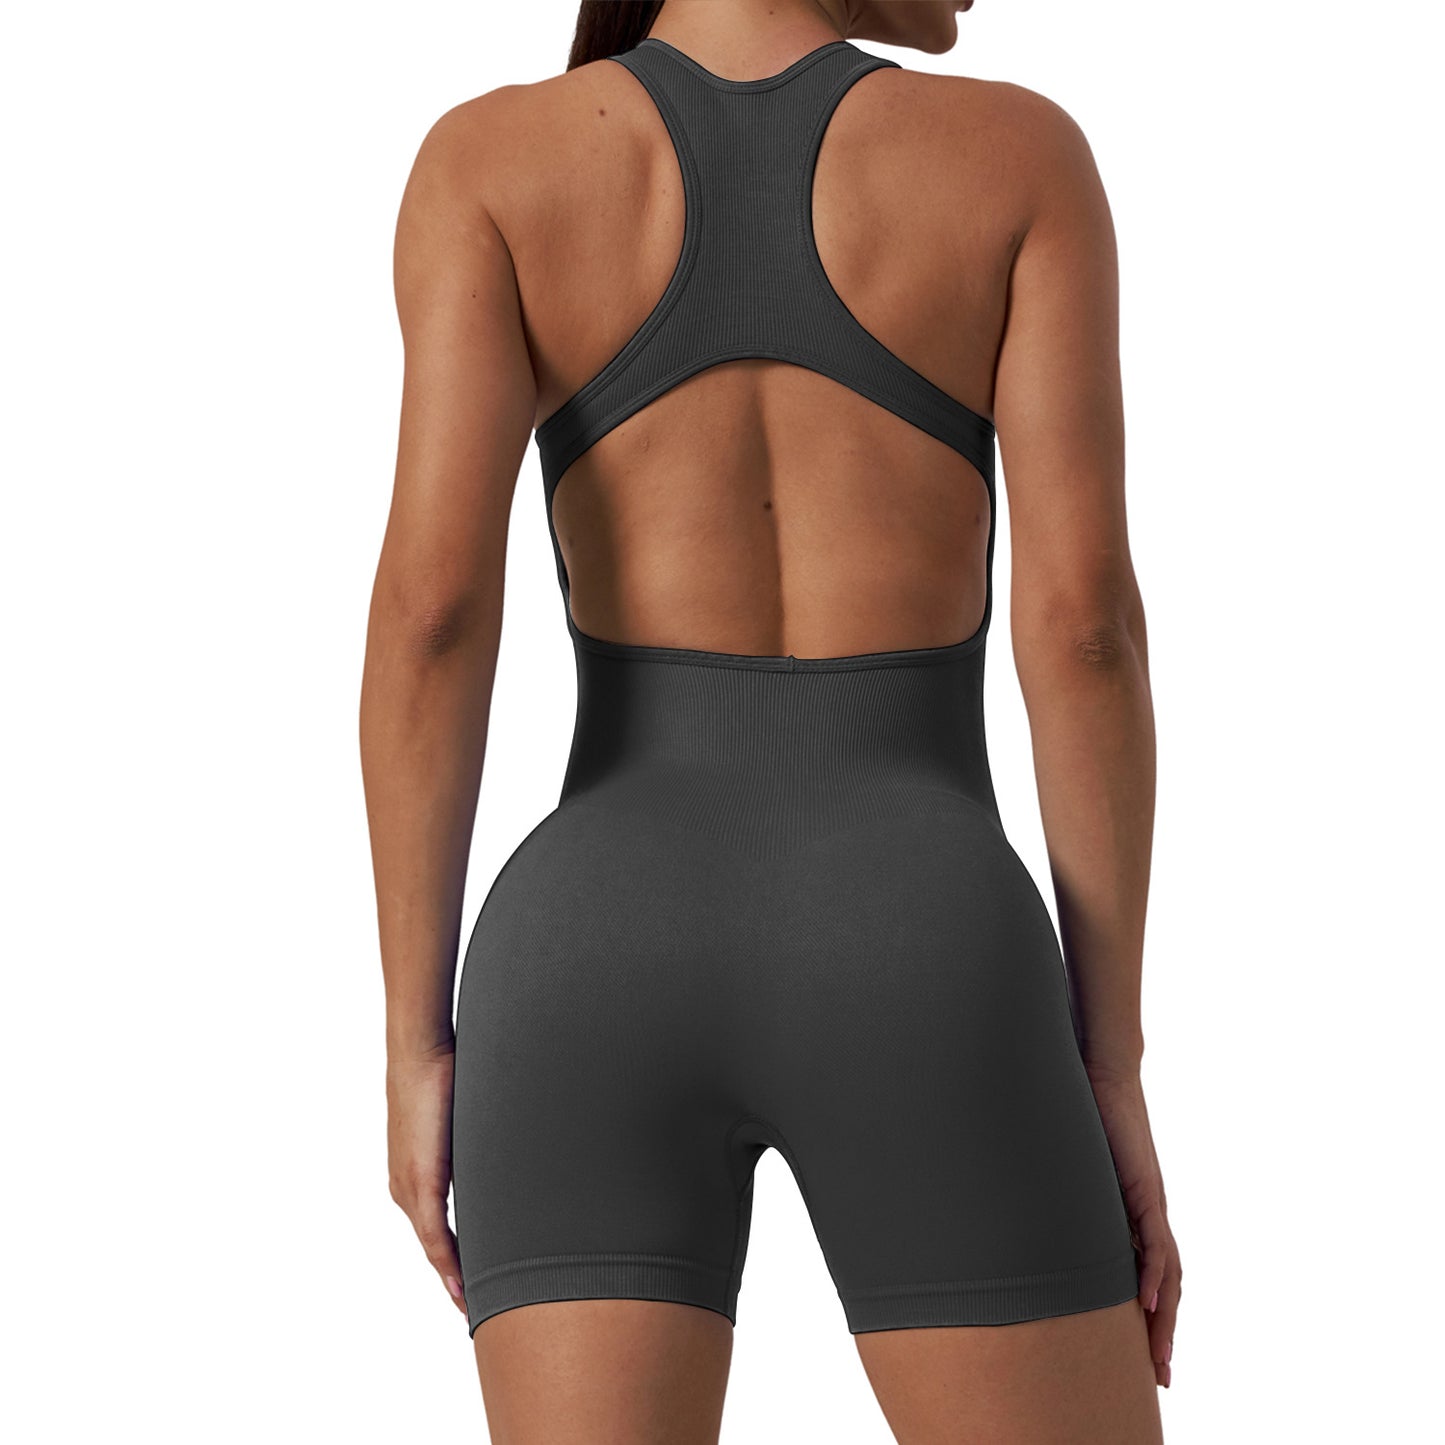 Seamless one-piece Yoga clothing Shorts 7 colors